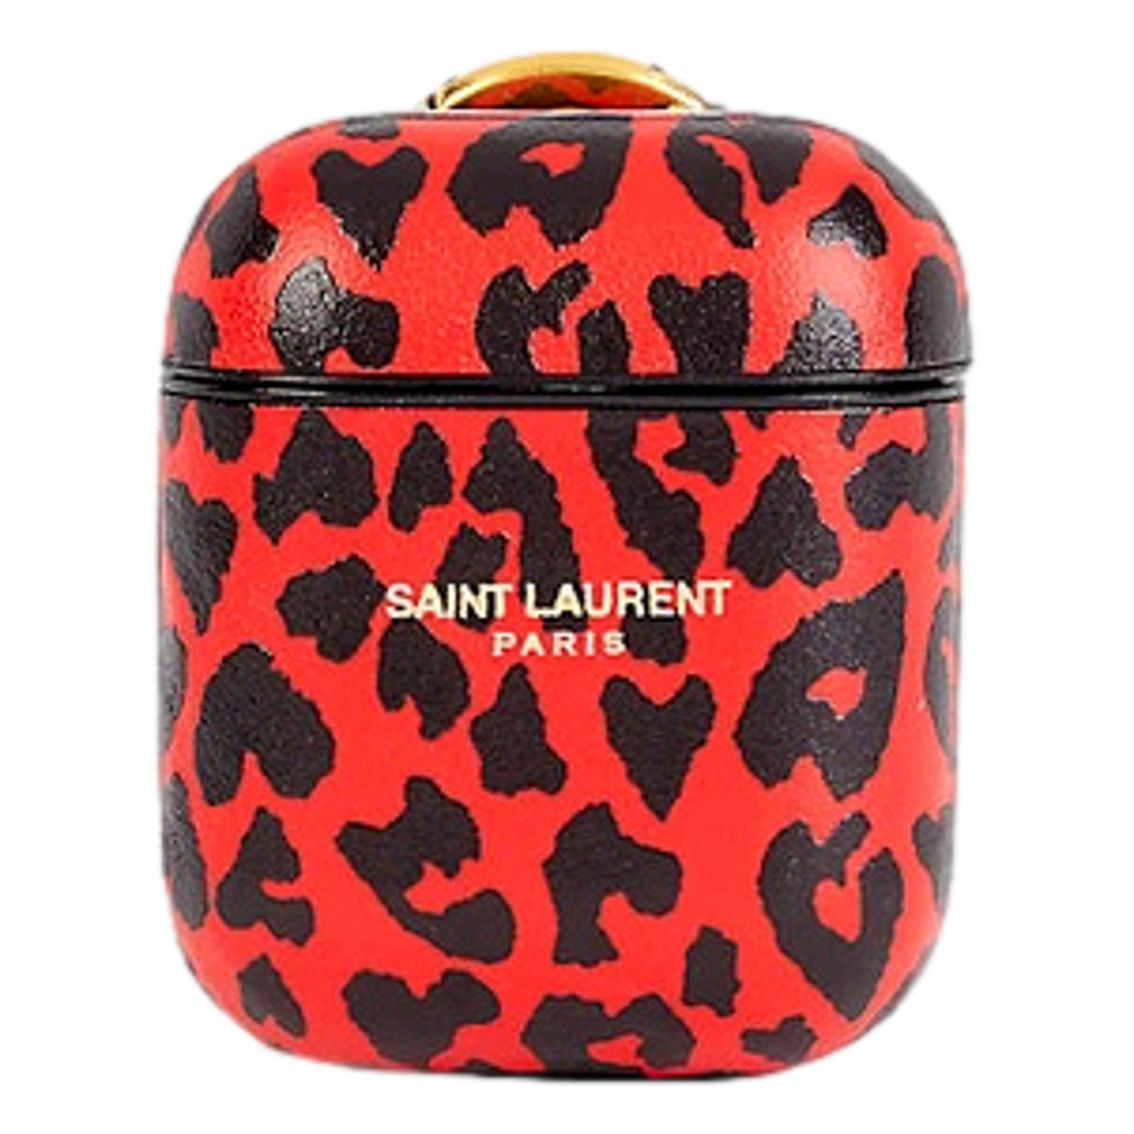 Saint Laurent Leopard Print Black and Red Leather Airpods Case (New) - Image 2 of 5